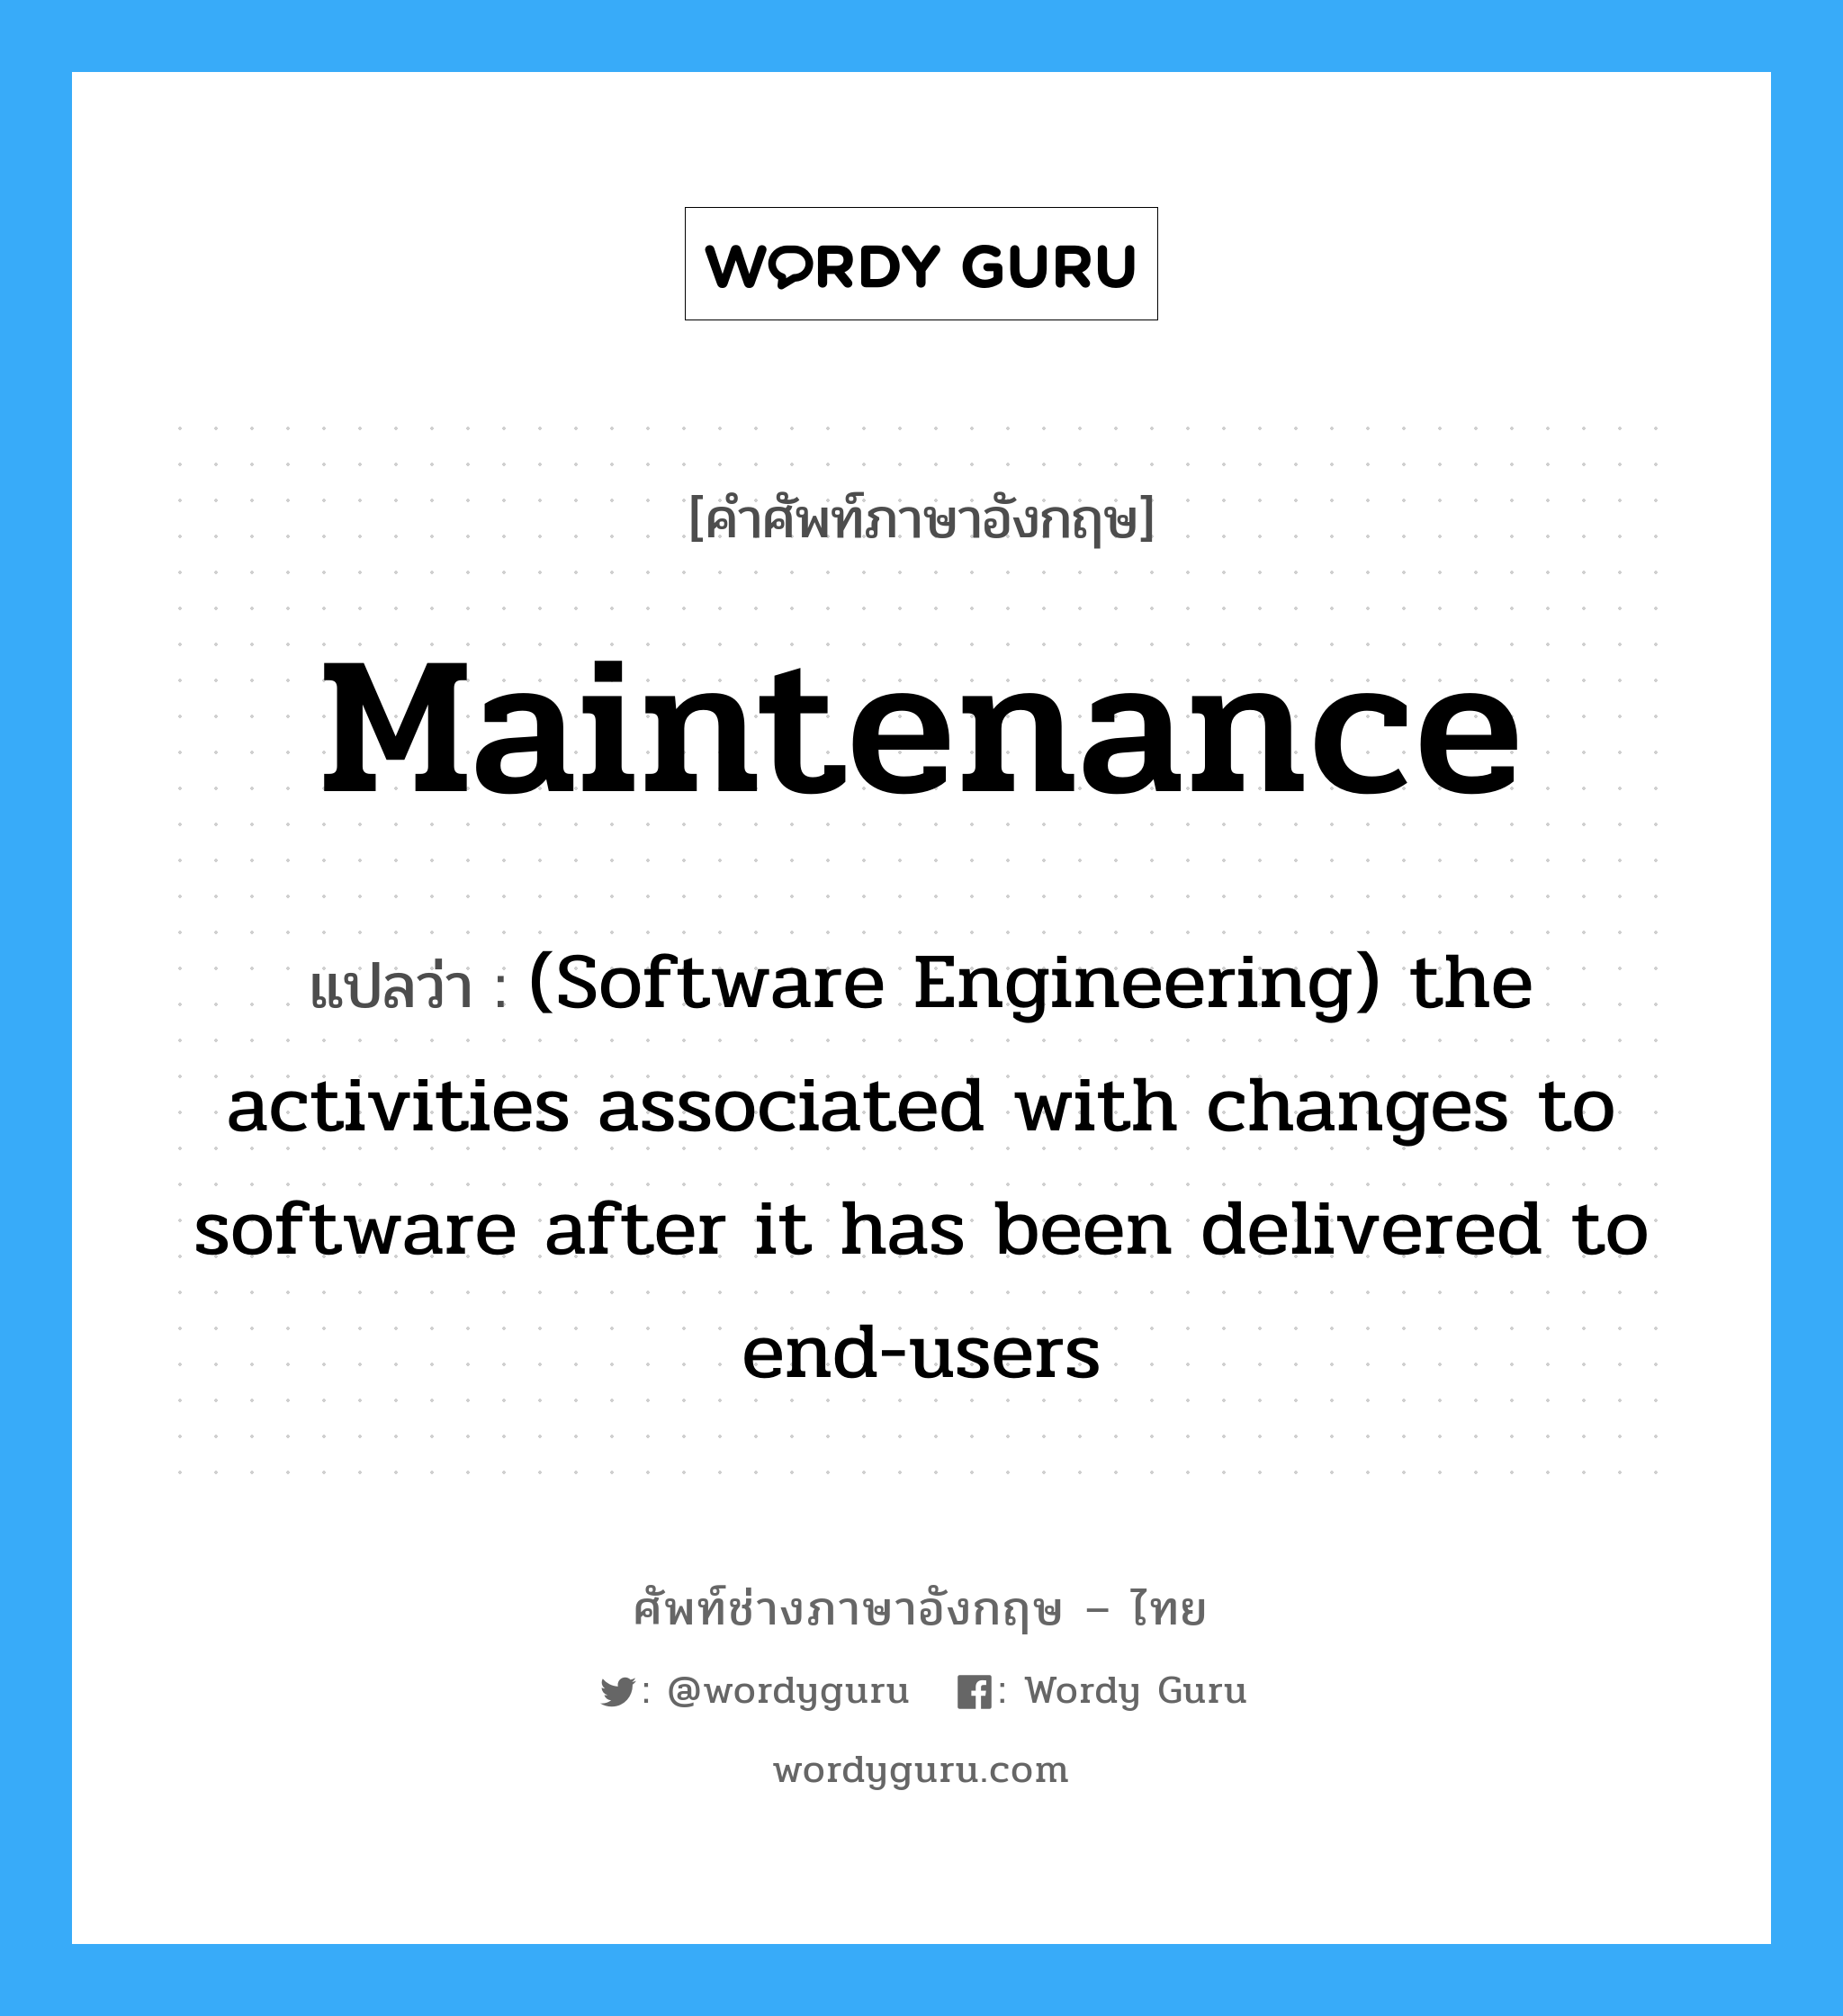 (Software Engineering) the activities associated with changes to software after it has been delivered to end-users ภาษาอังกฤษ?, คำศัพท์ช่างภาษาอังกฤษ - ไทย (Software Engineering) the activities associated with changes to software after it has been delivered to end-users คำศัพท์ภาษาอังกฤษ (Software Engineering) the activities associated with changes to software after it has been delivered to end-users แปลว่า Maintenance